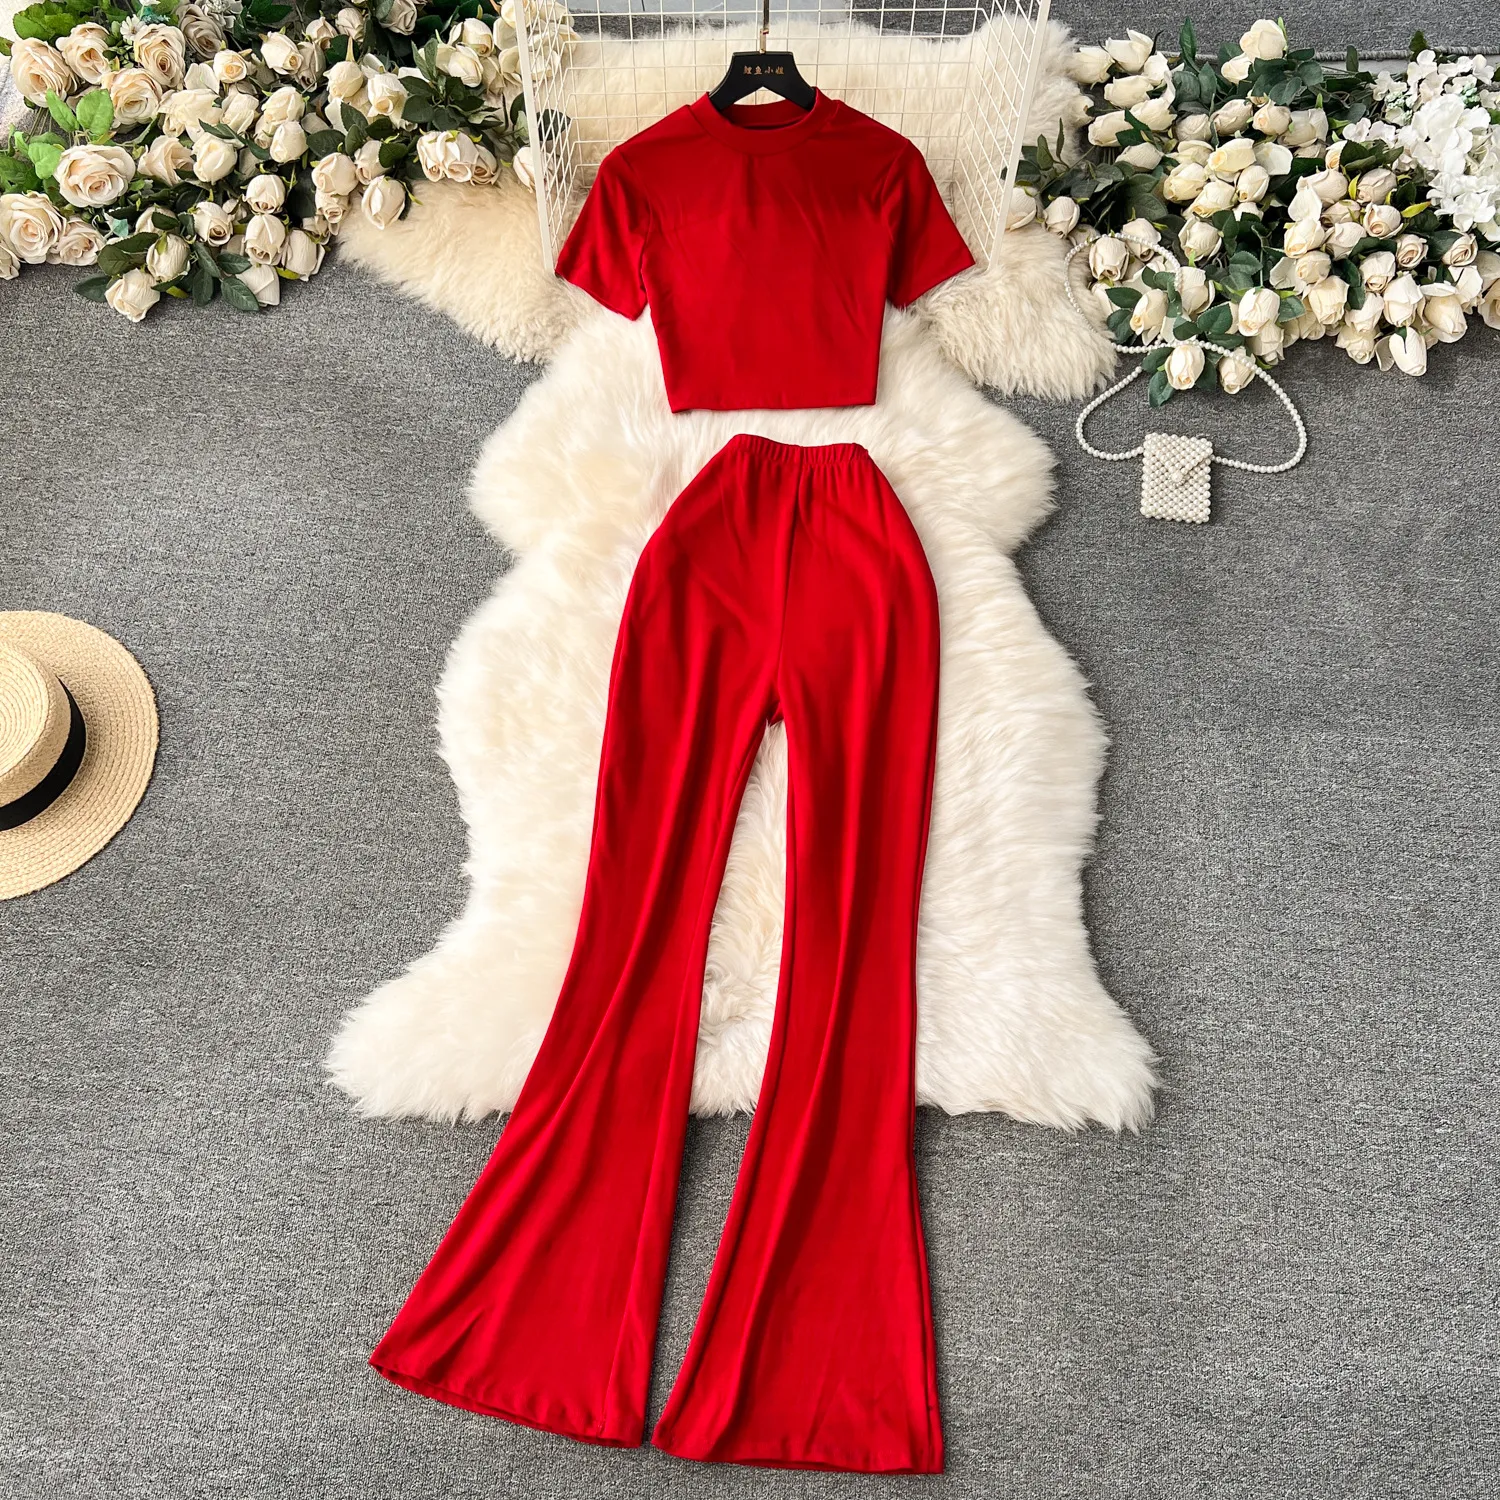 Pure desire spicy girl style fashion set, women's short sleeved exposed navel top+high waist slimming micro flared long pants two-piece set